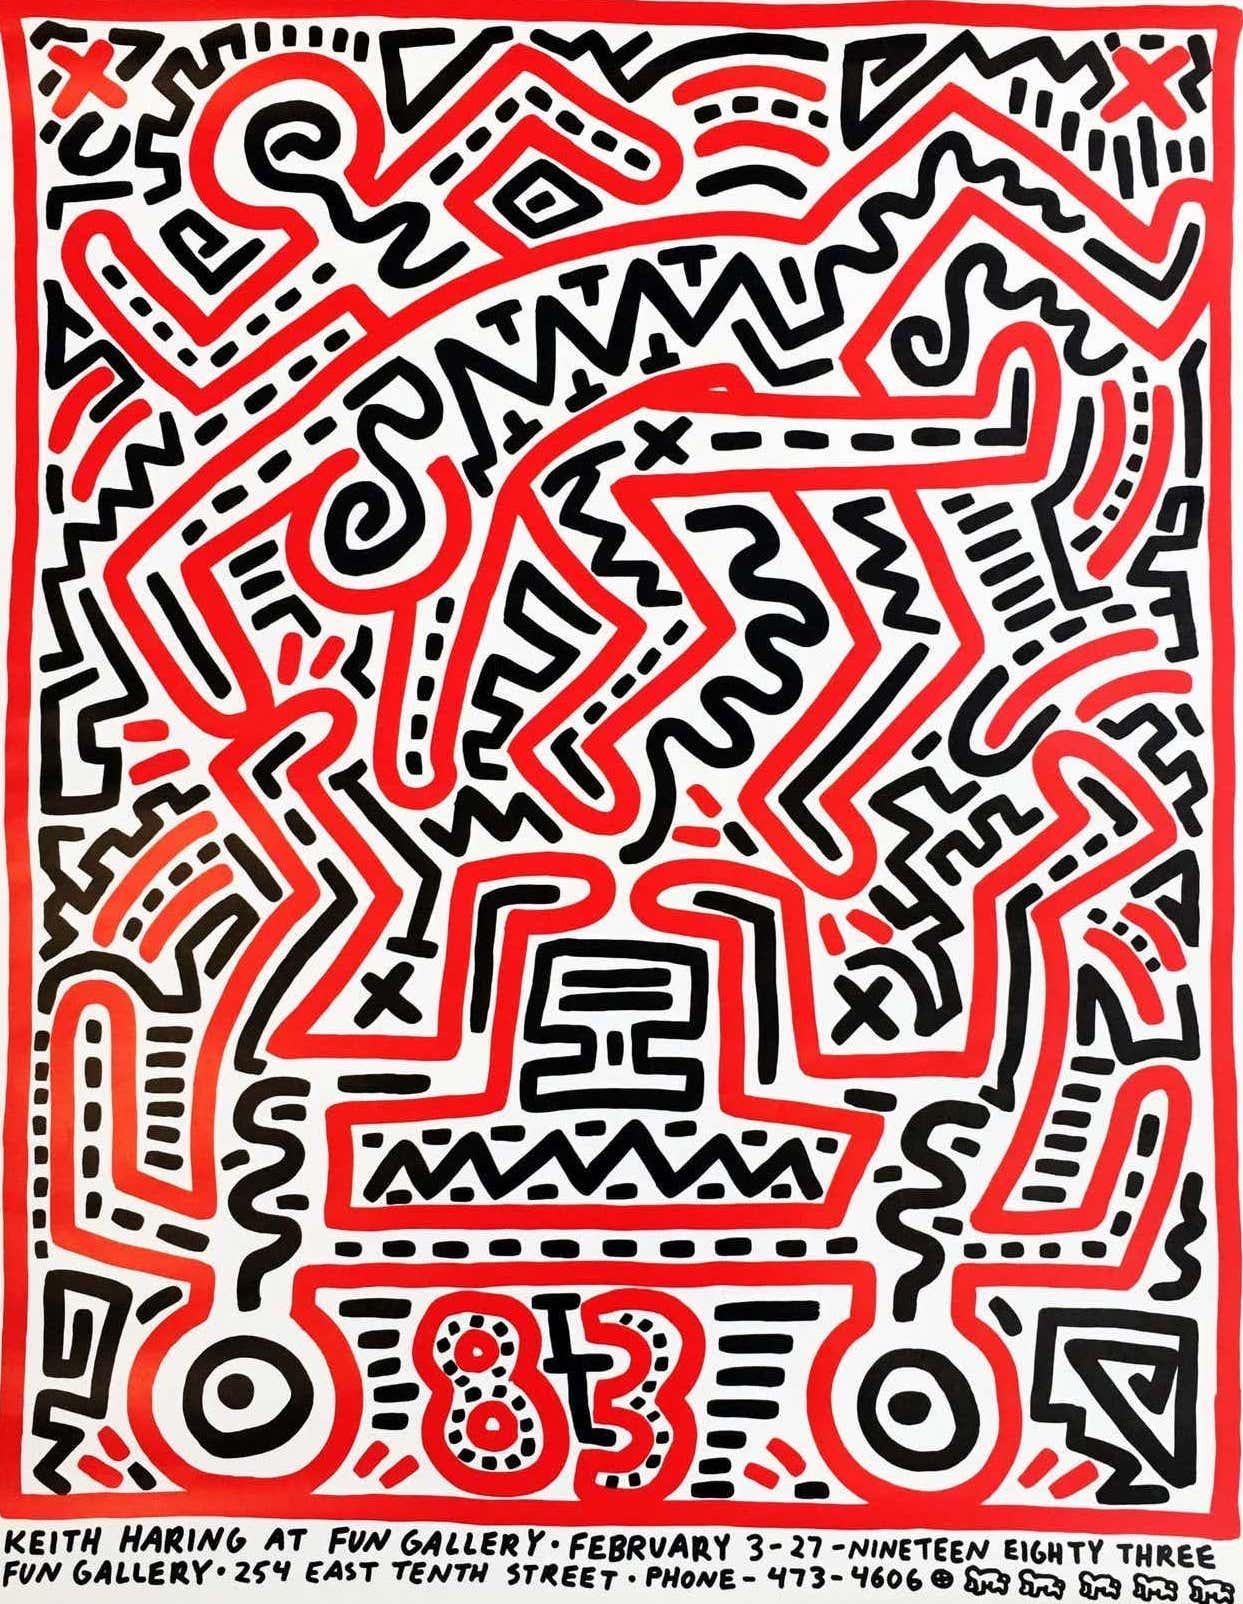 Keith Haring Fun Gallery 1983:
Original 1983 Keith Haring illustrated exhibition poster published on the occasion of Haring's historic 1983 show at the Fun Gallery in the East Village. A classic array of early Haring imagery that reveals red and